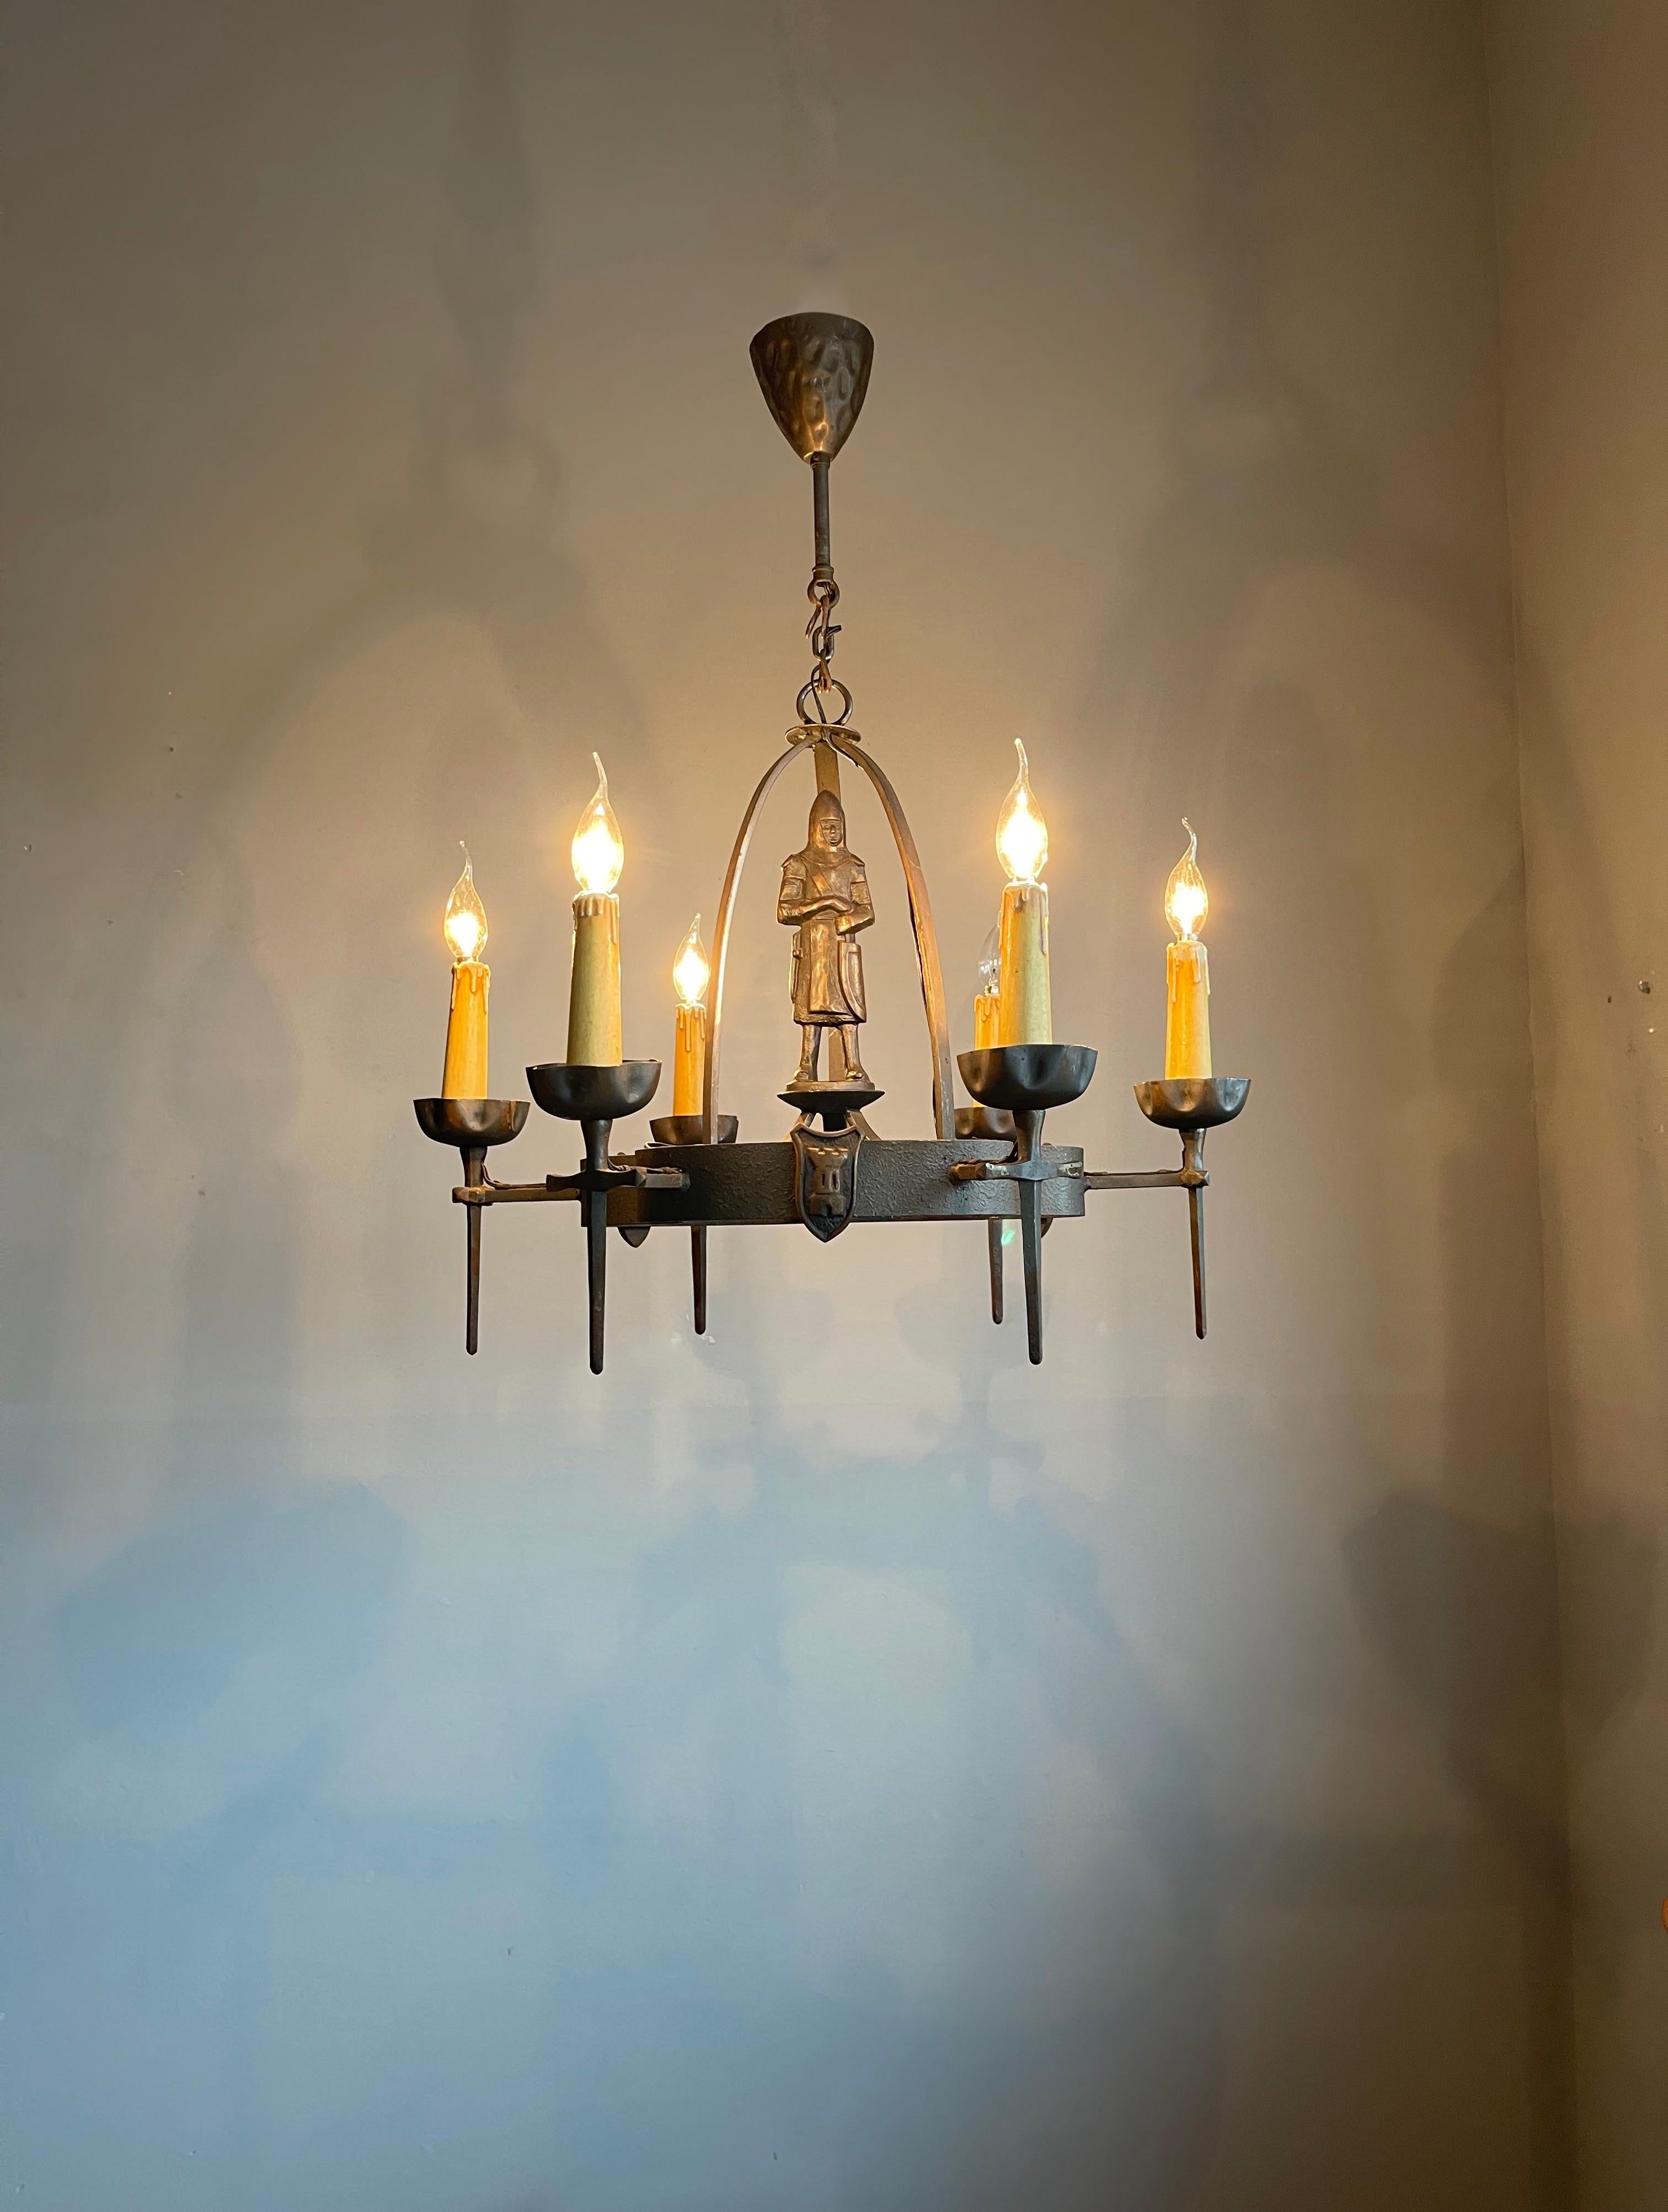 Stylish and highly decorative six-light medieval style pendant light.

With early 20th century lighting as one of our specialities, we have seen a lot of great and unique fixtures, but never did we come across a handcrafted, mediëval style pendant